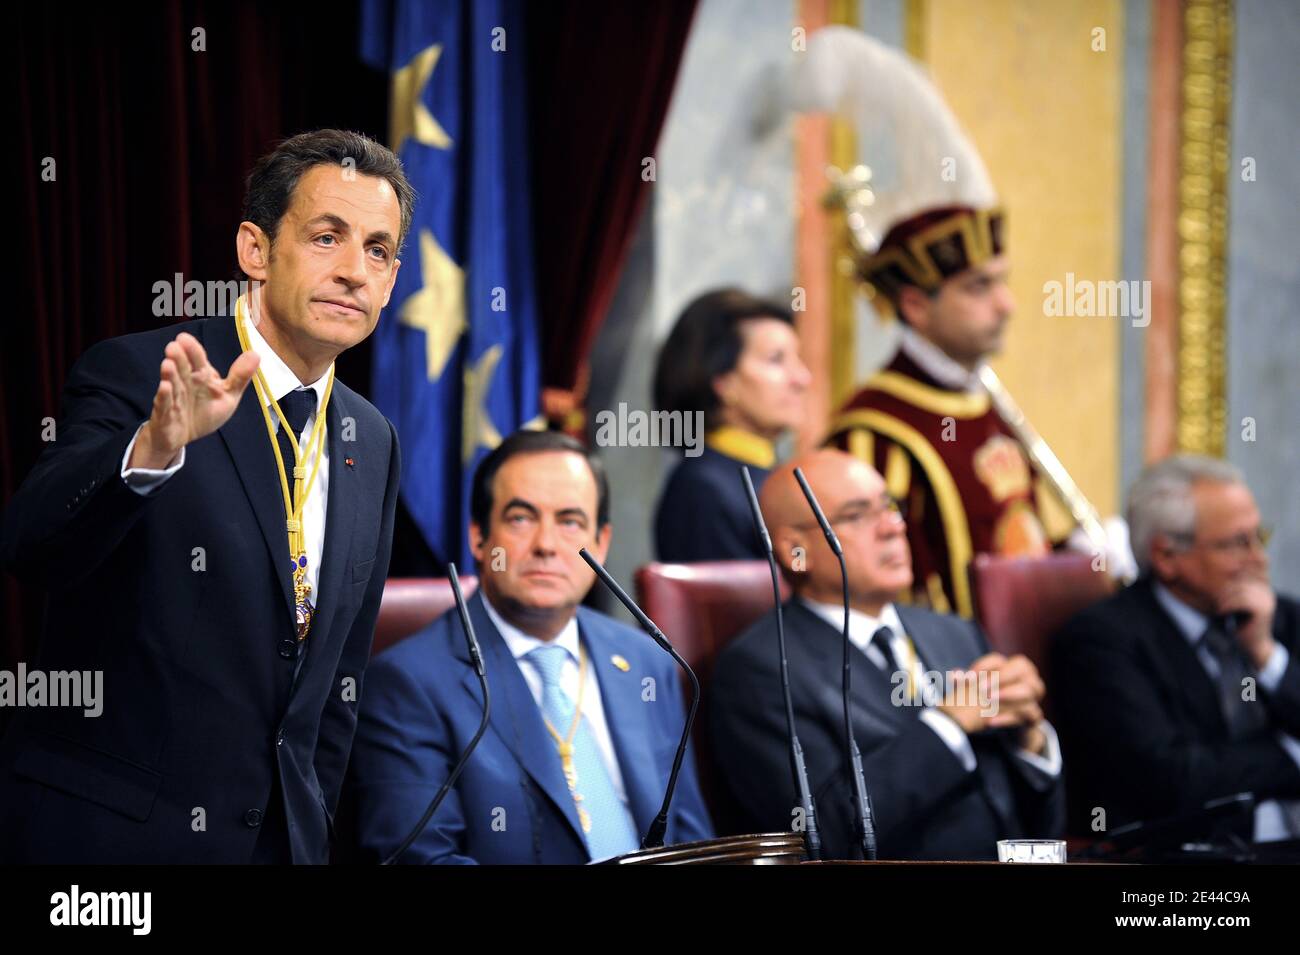 French President Nicolas Sarkozy addresses the Spanish Parliament, 'Cortes', in Madrid, Spain on April 28, 2009. Sarkozy began his first official state visit to Spain on Monday promising backing in the fight against terrorism and saying relations have 'never been so strong,' but it was his wife Carla who grabbed the spotlight. Photo by Thierry Orban/ABACAPRESS.COM Stock Photo